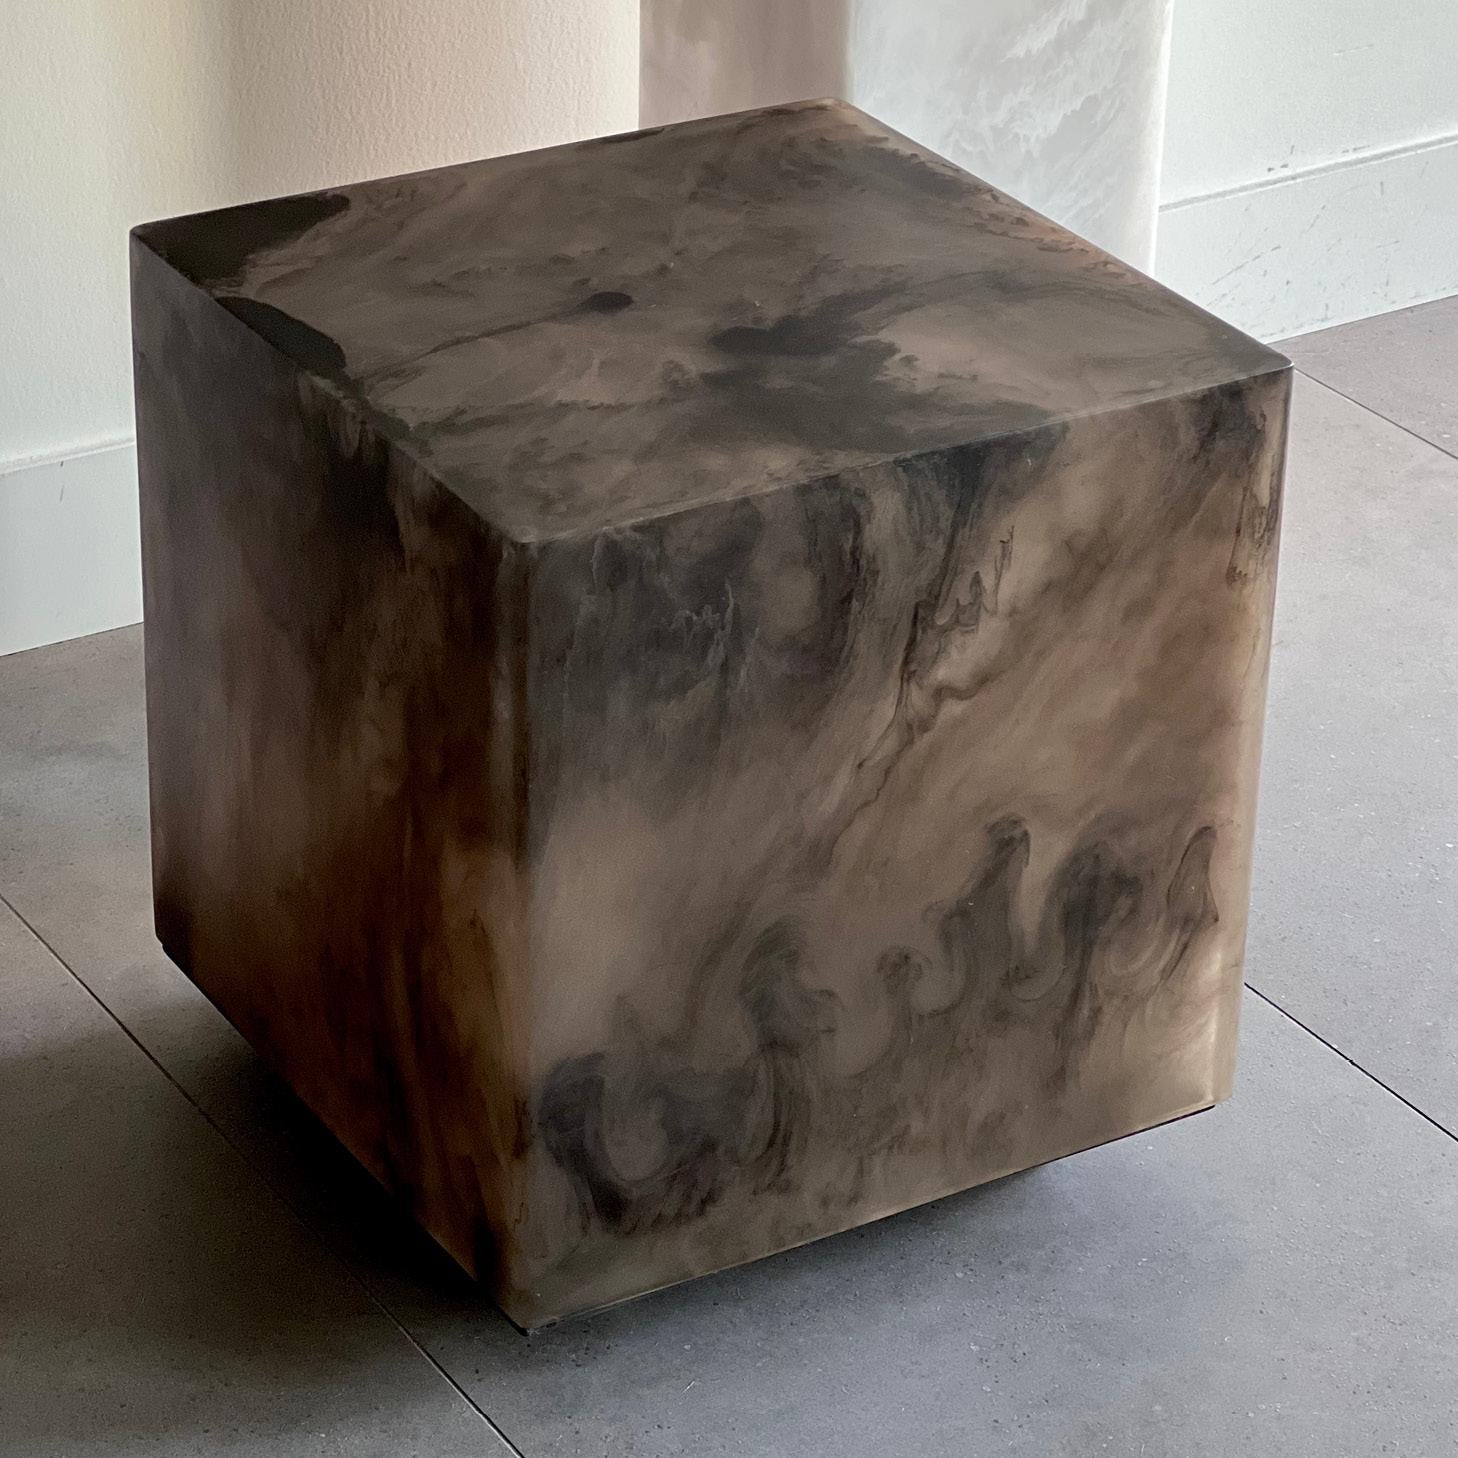 Studio Sturdy Chief Square Side Table – Clay with Black Marble Resin In New Condition For Sale In Vancouver, CA